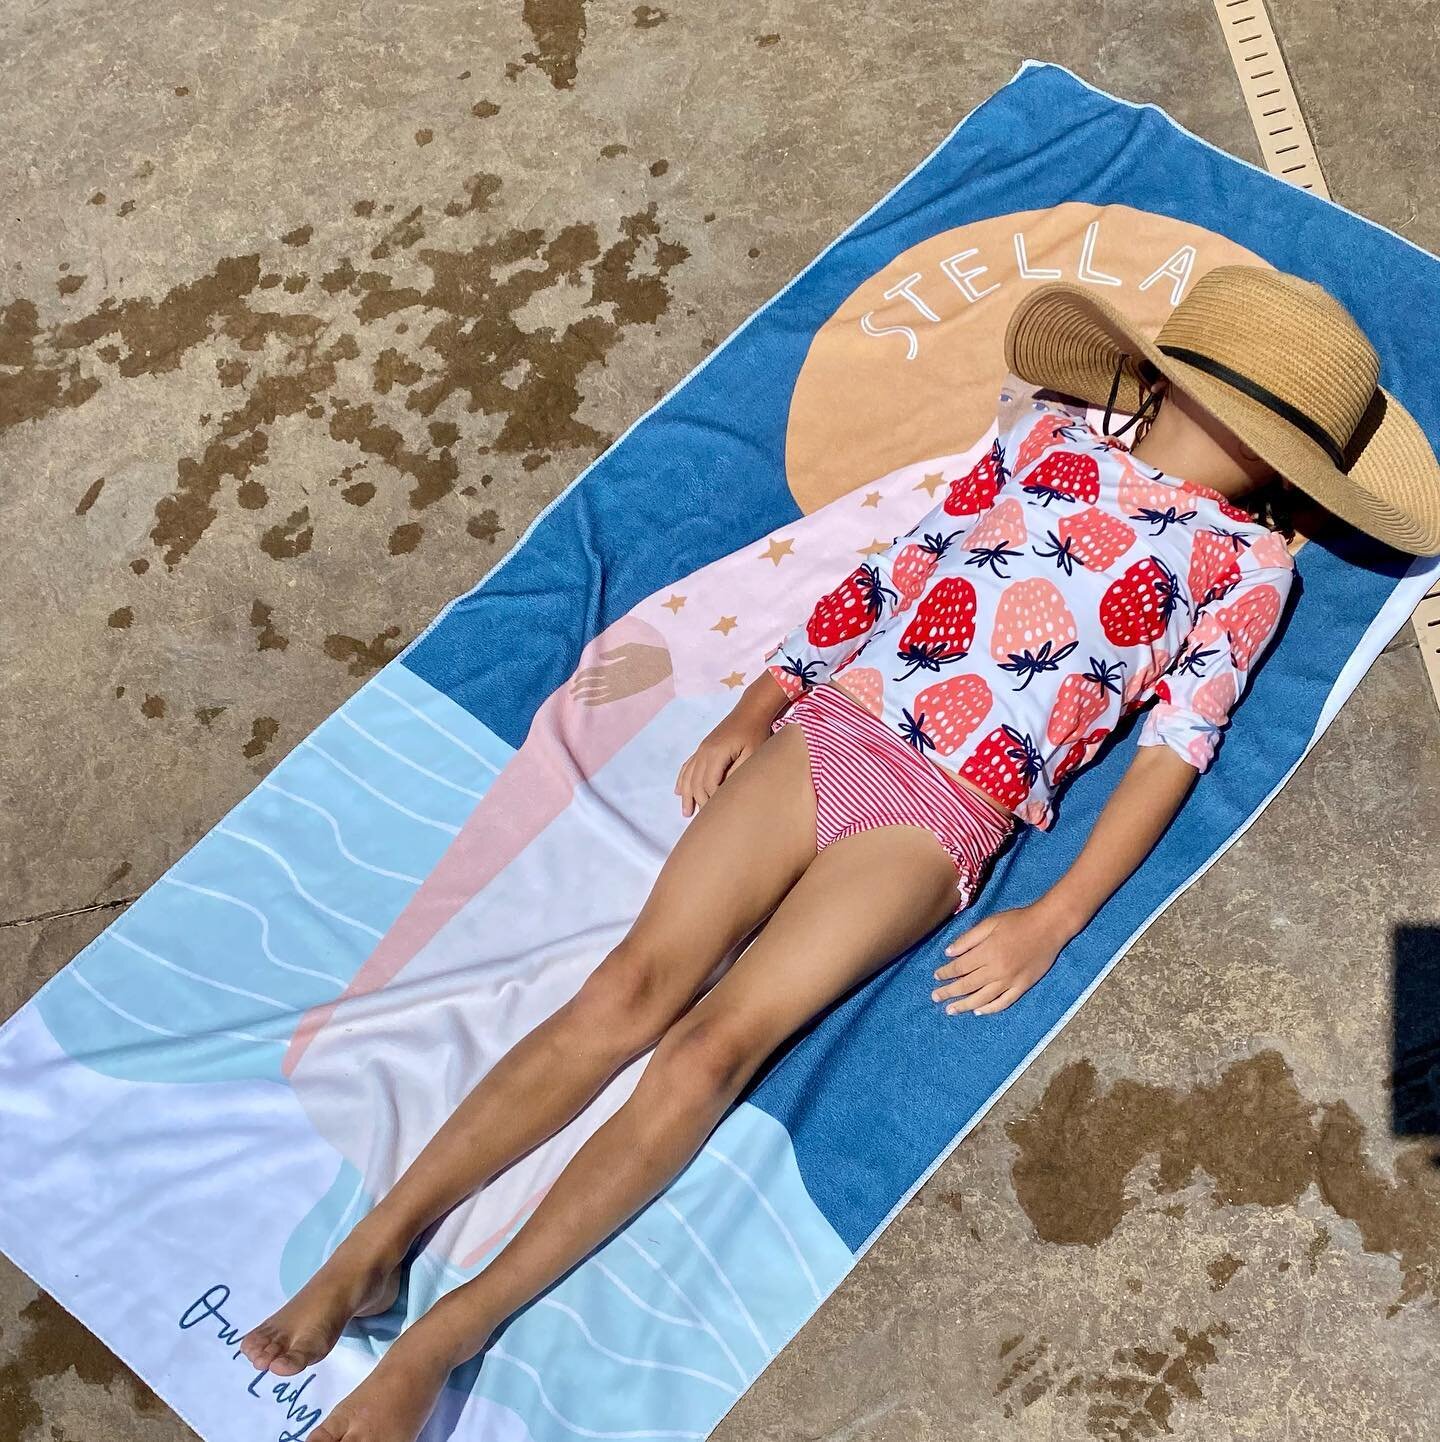 Warming up poolside with Our Lady
🥰
Towel: @beaheartdesign